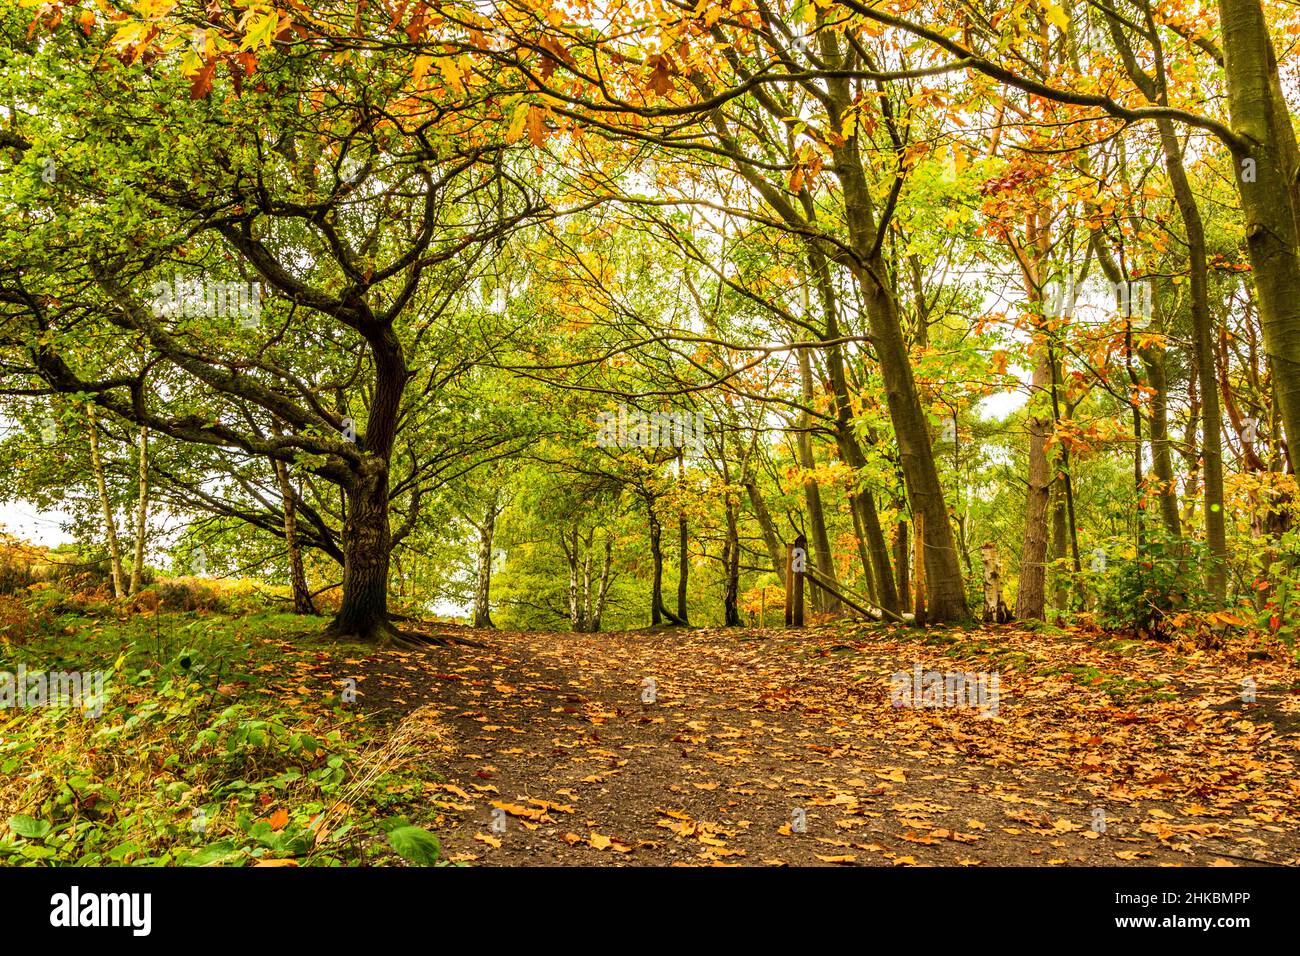 Autumn leaves in the United Kingdom Stock Photo